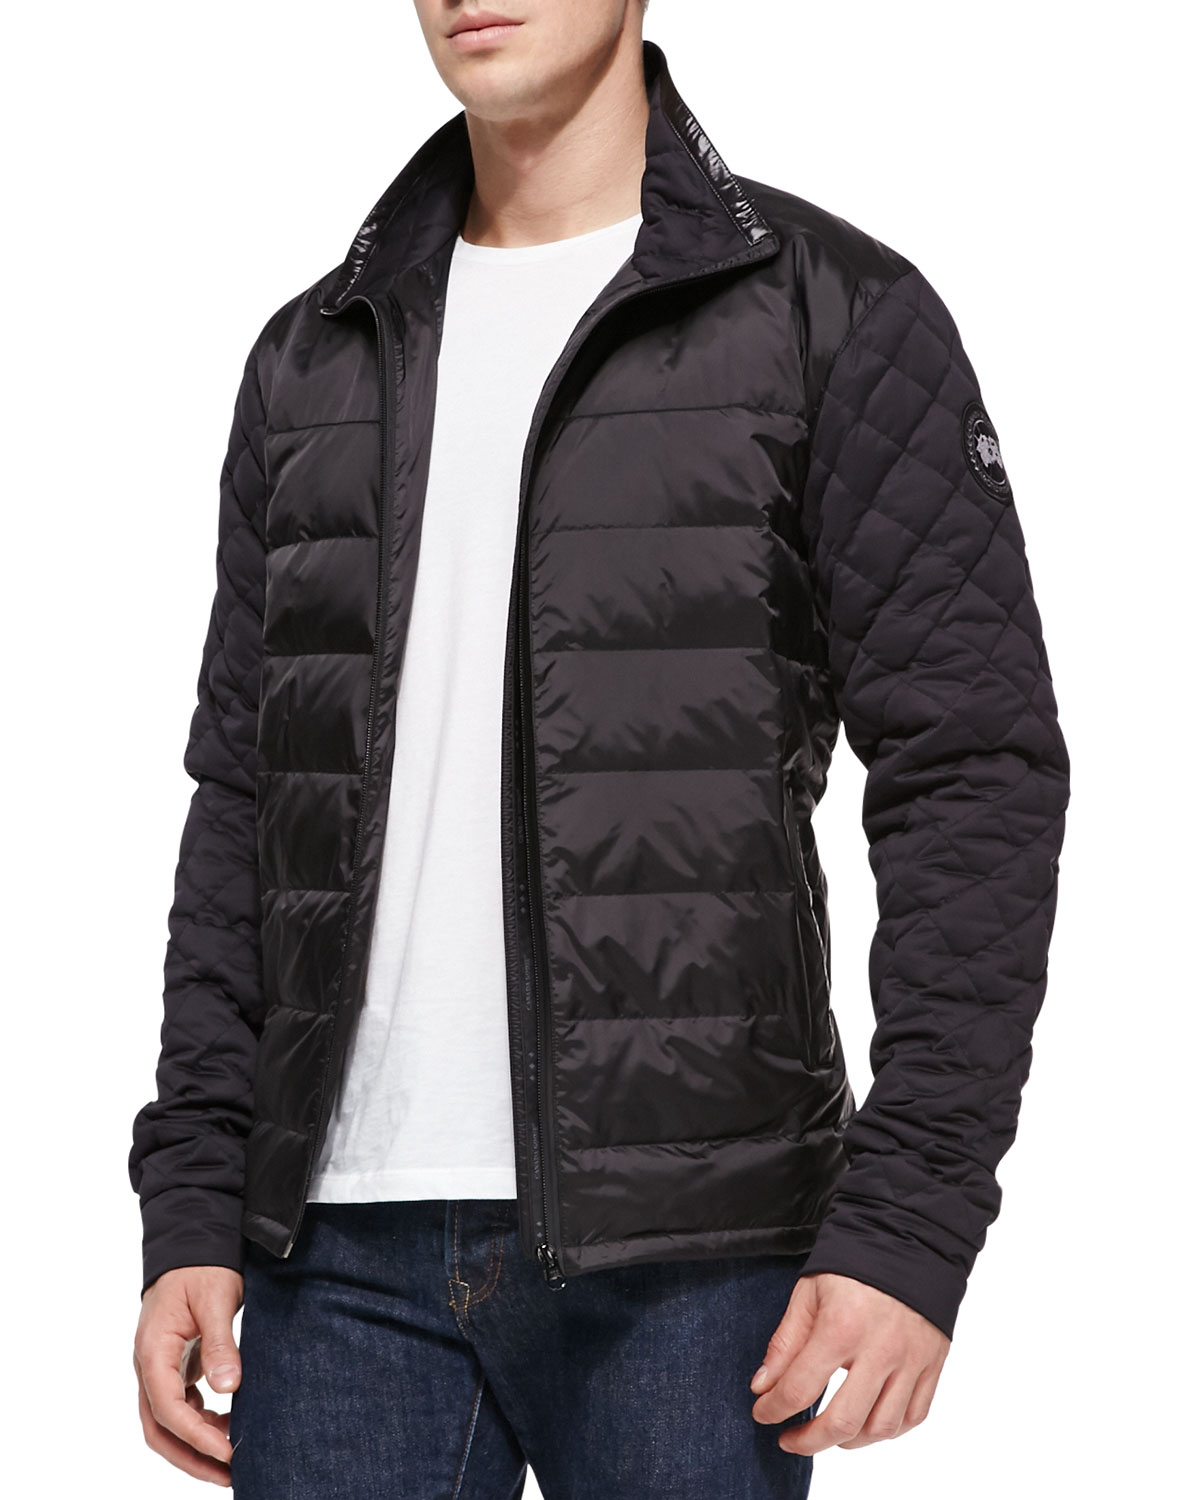 Canada Goose chateau parka online price - New Style Canada Goose Trillium Niagara Grape Clearance For Sale